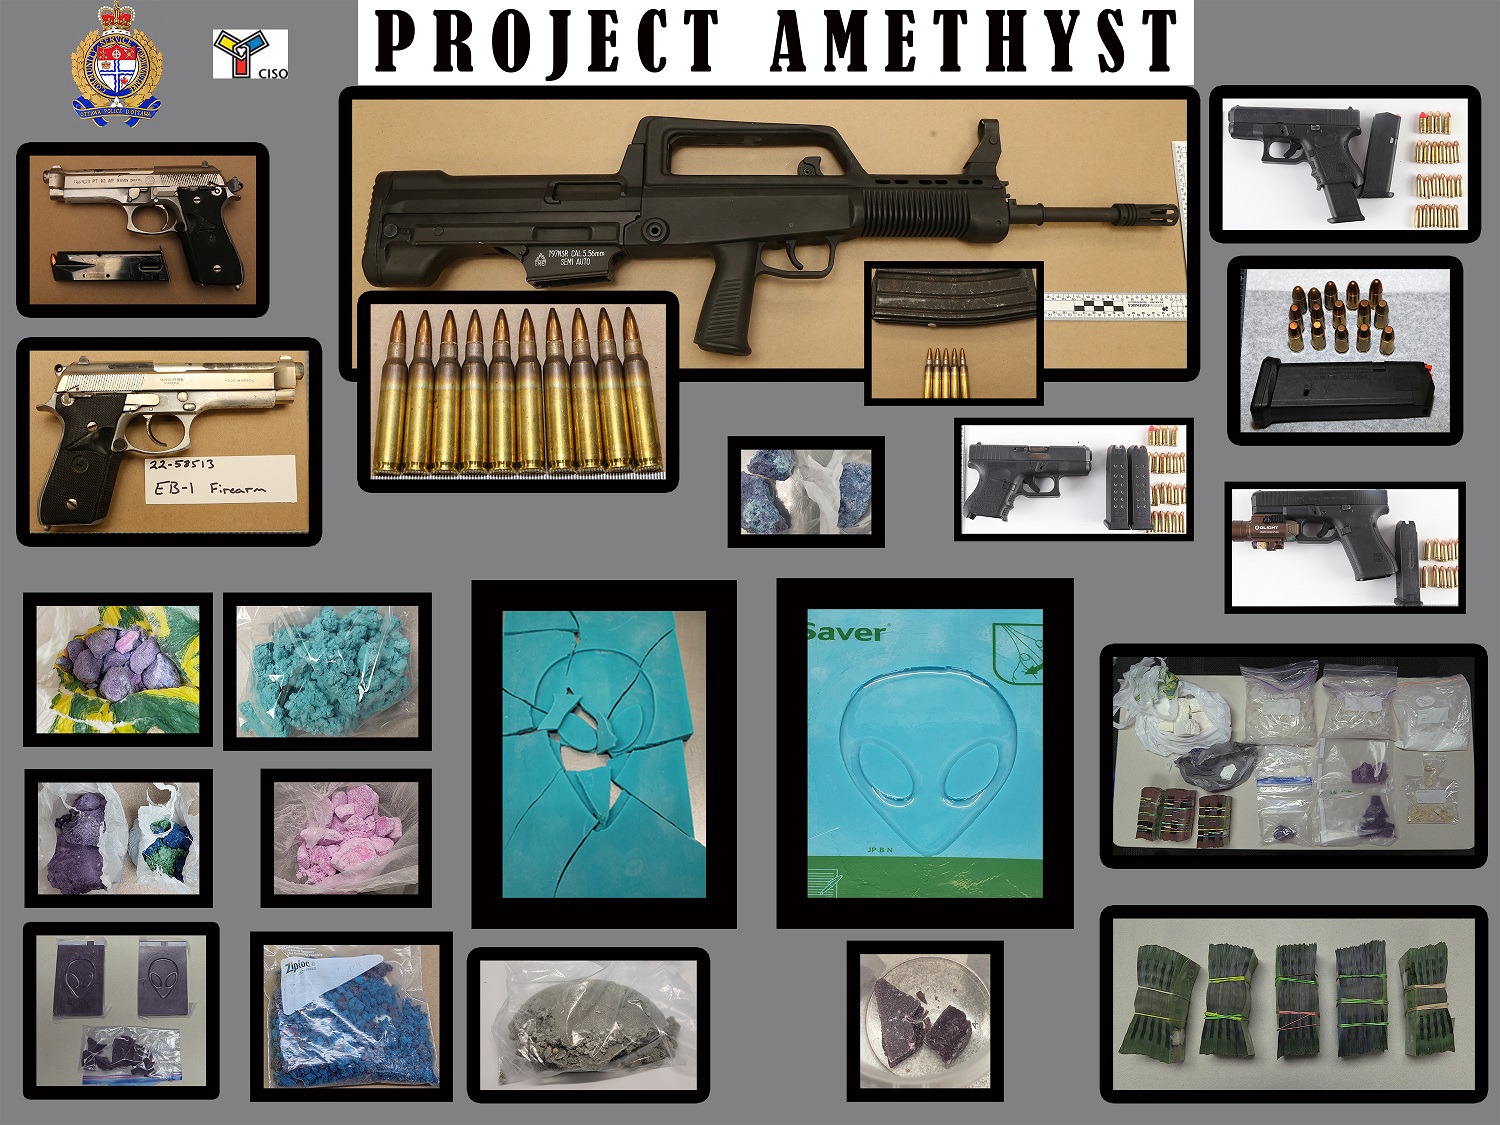 Collage of guns and drugs seized in Project Amethyst